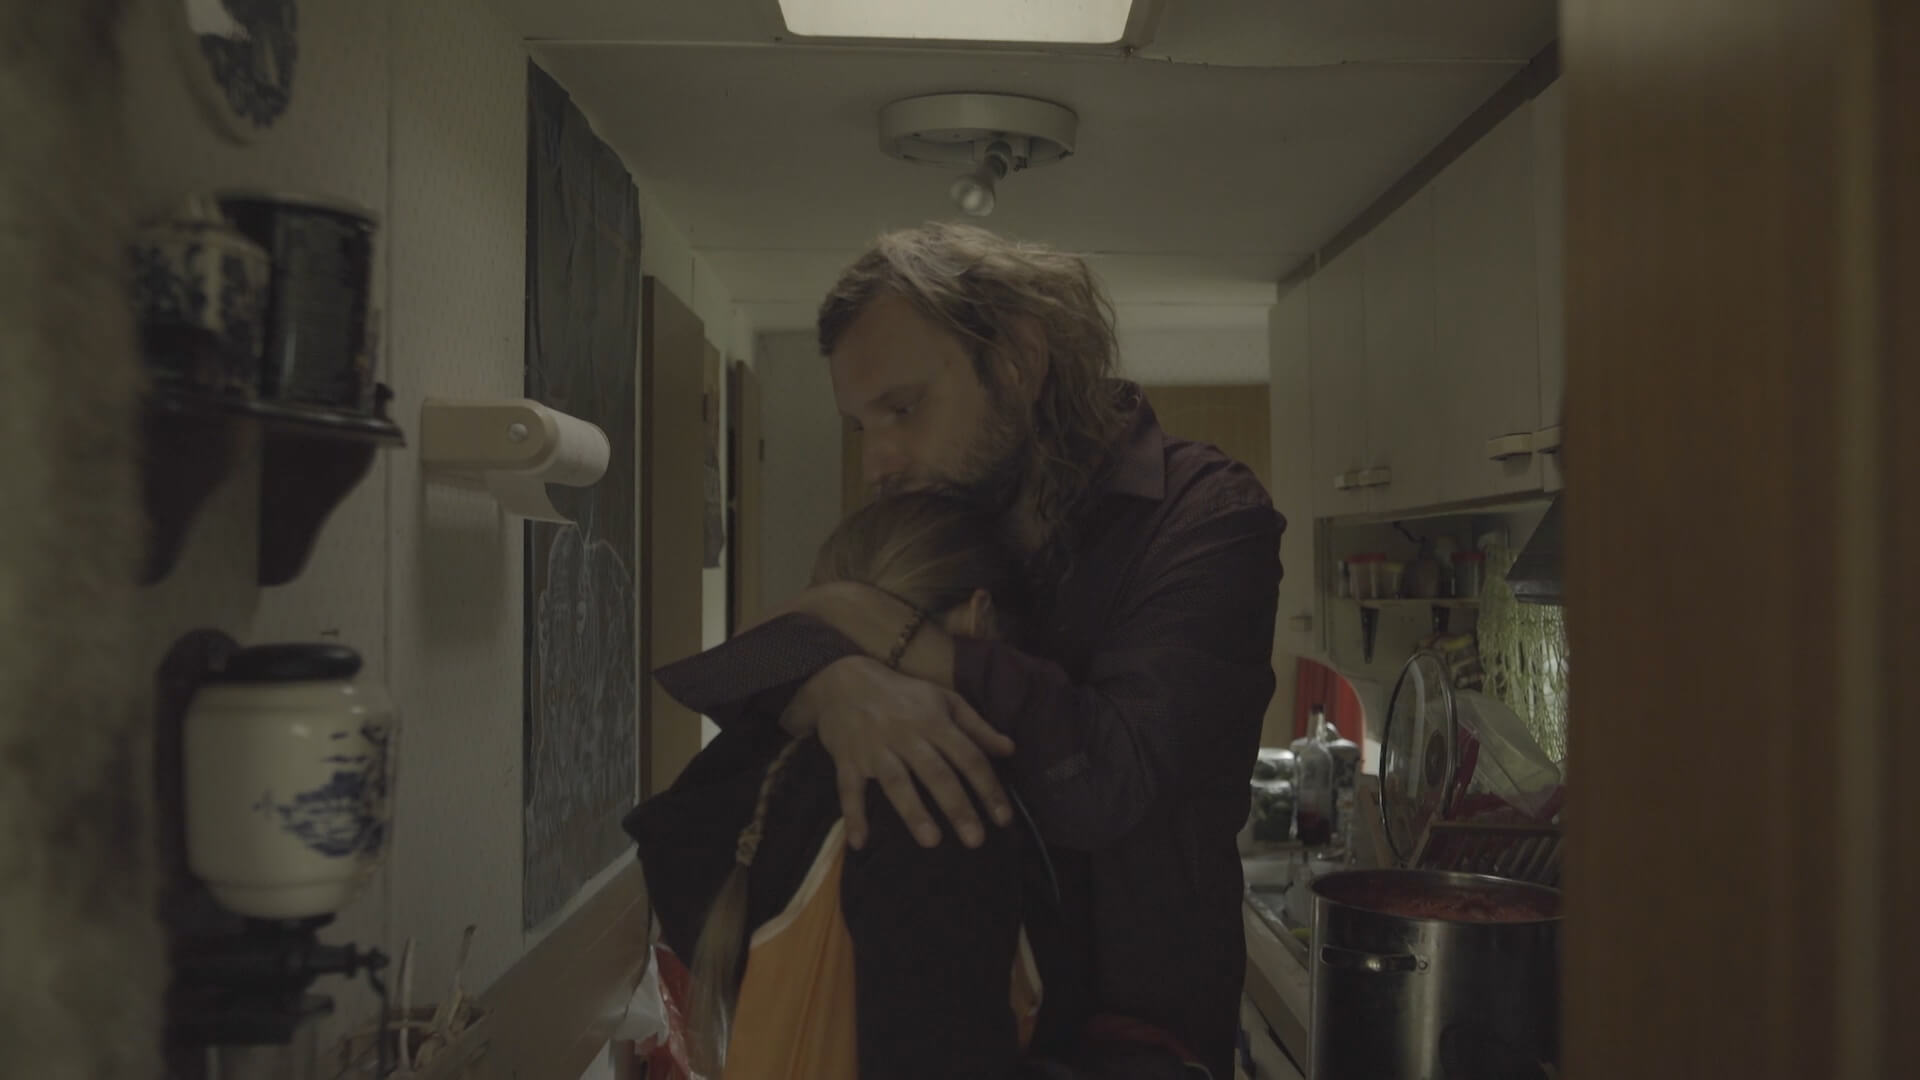 A blonde man and woman hugging in a small kitchen, with the woman's face hidden in the nook of the man's shoulder.